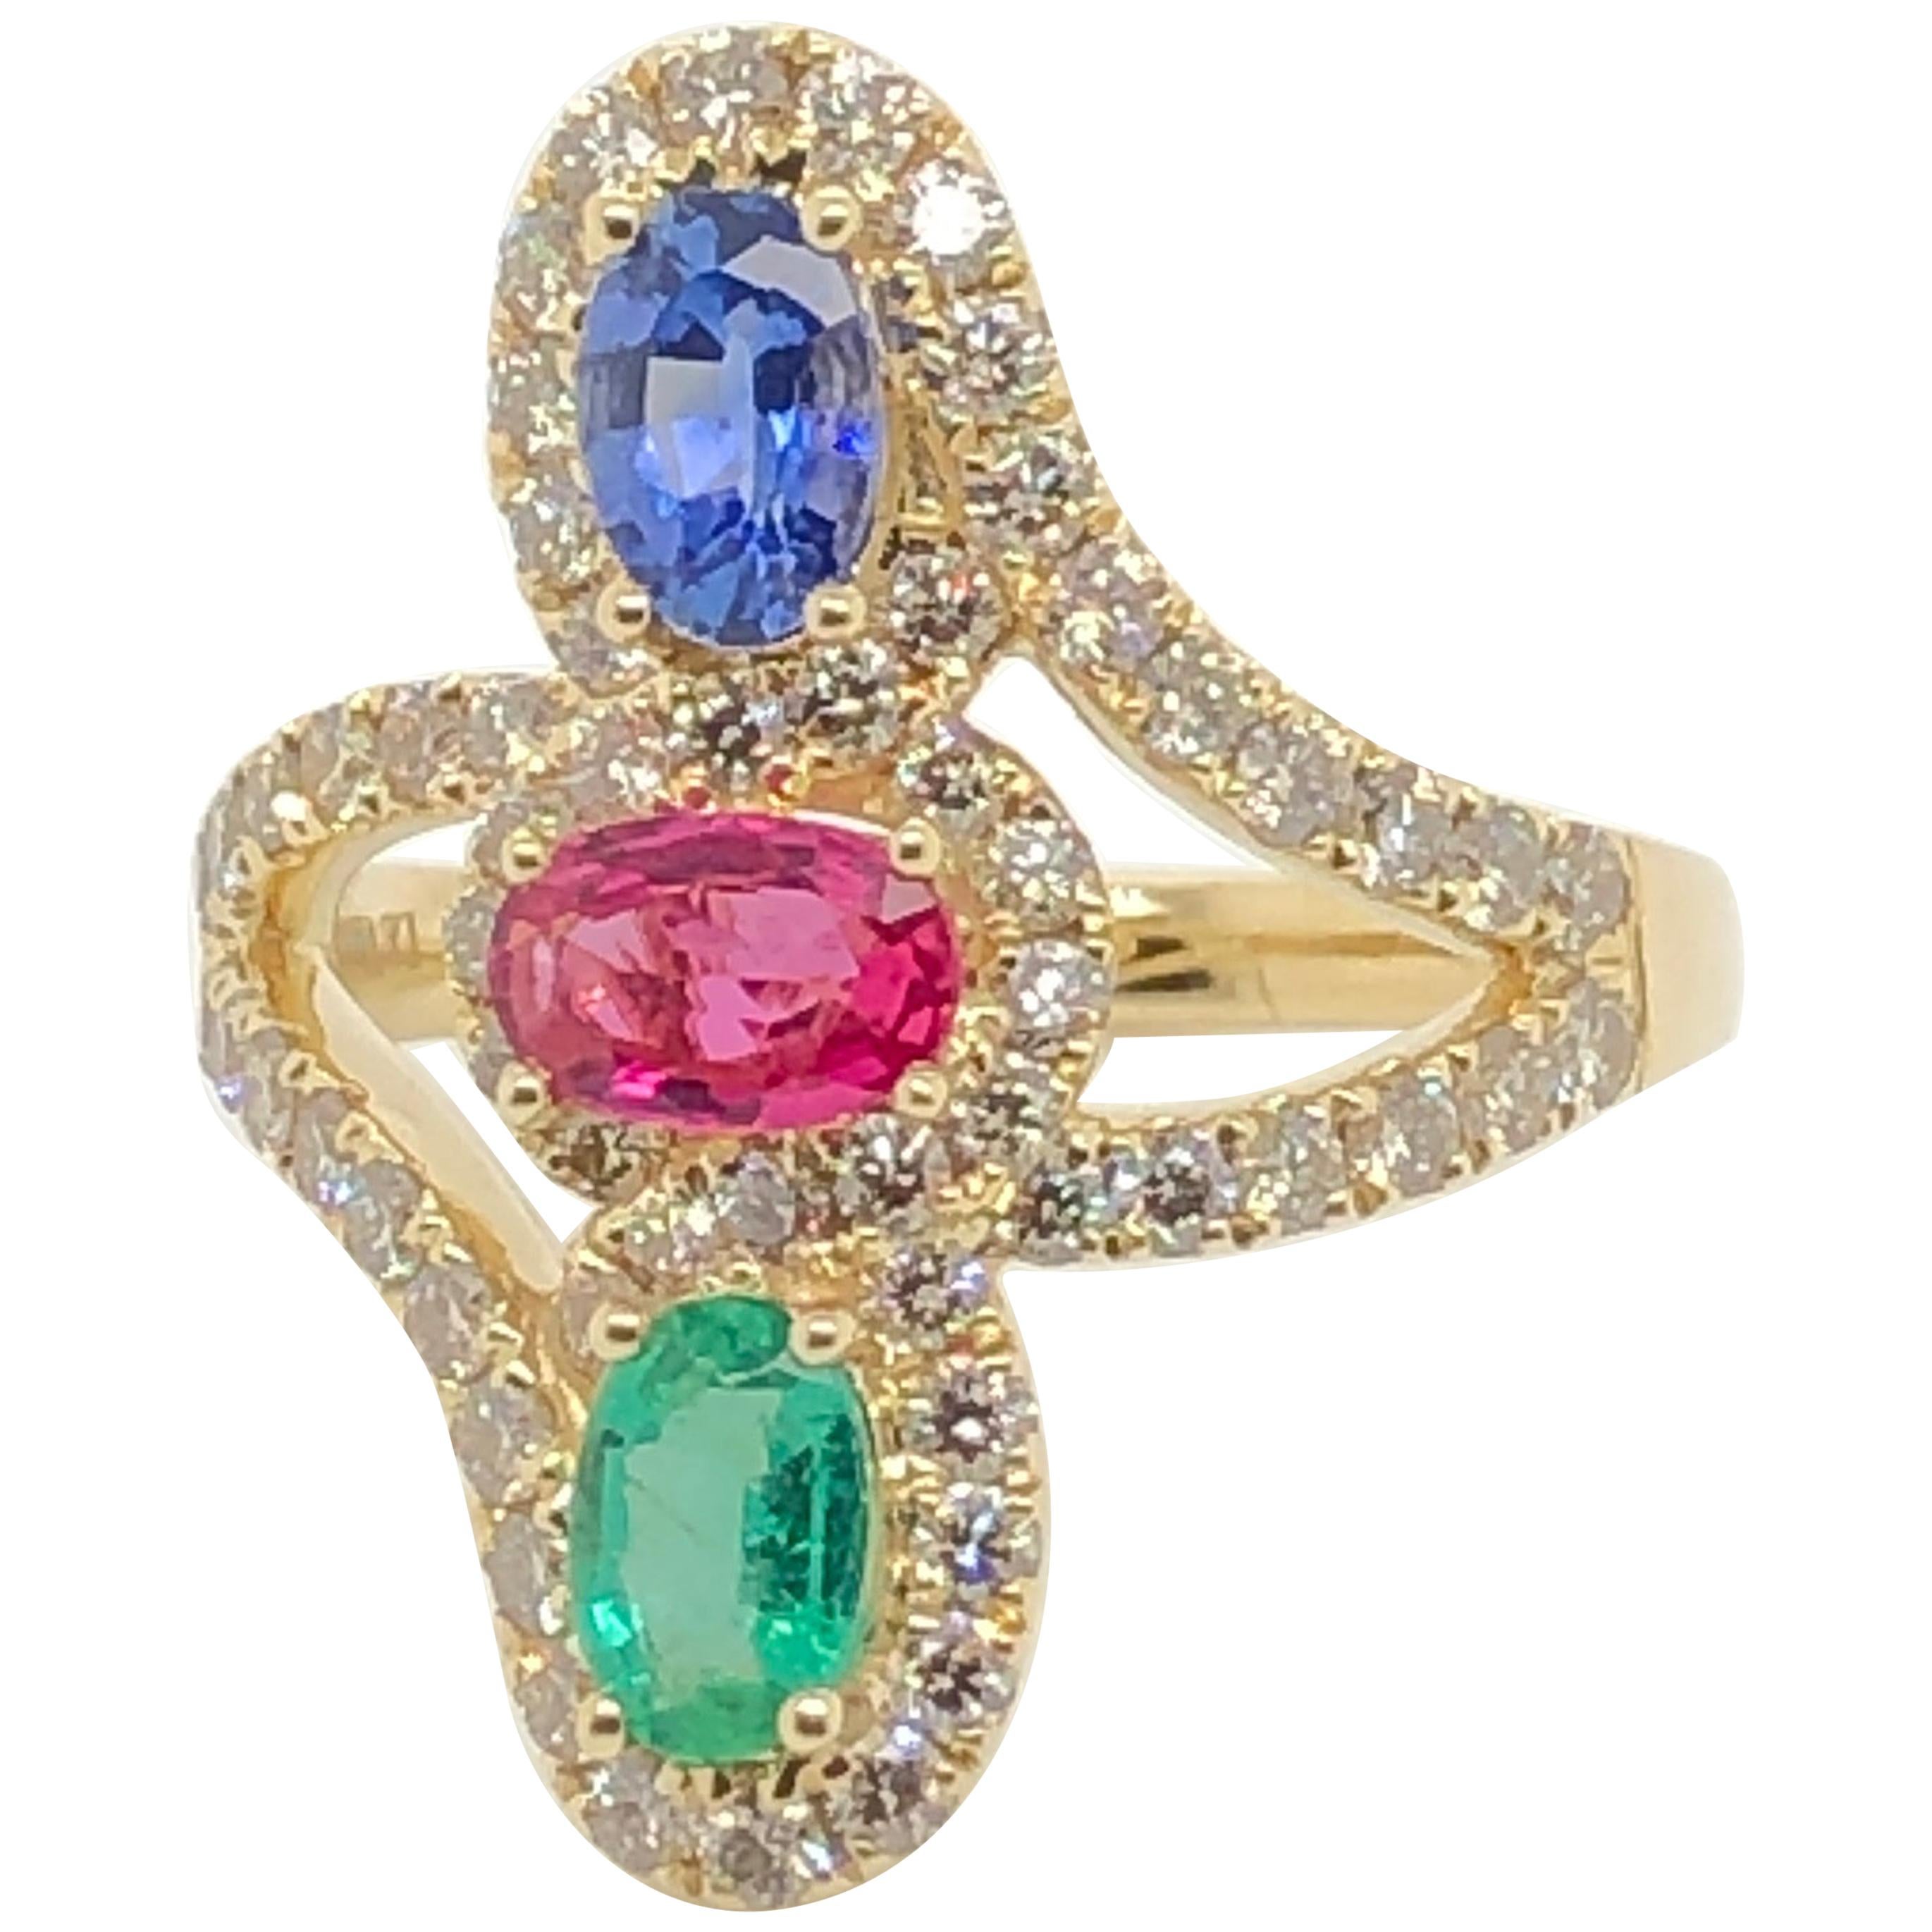 Le Vian Creme Brulee Ruby Sapphire Emerald Yellow Gold Ring